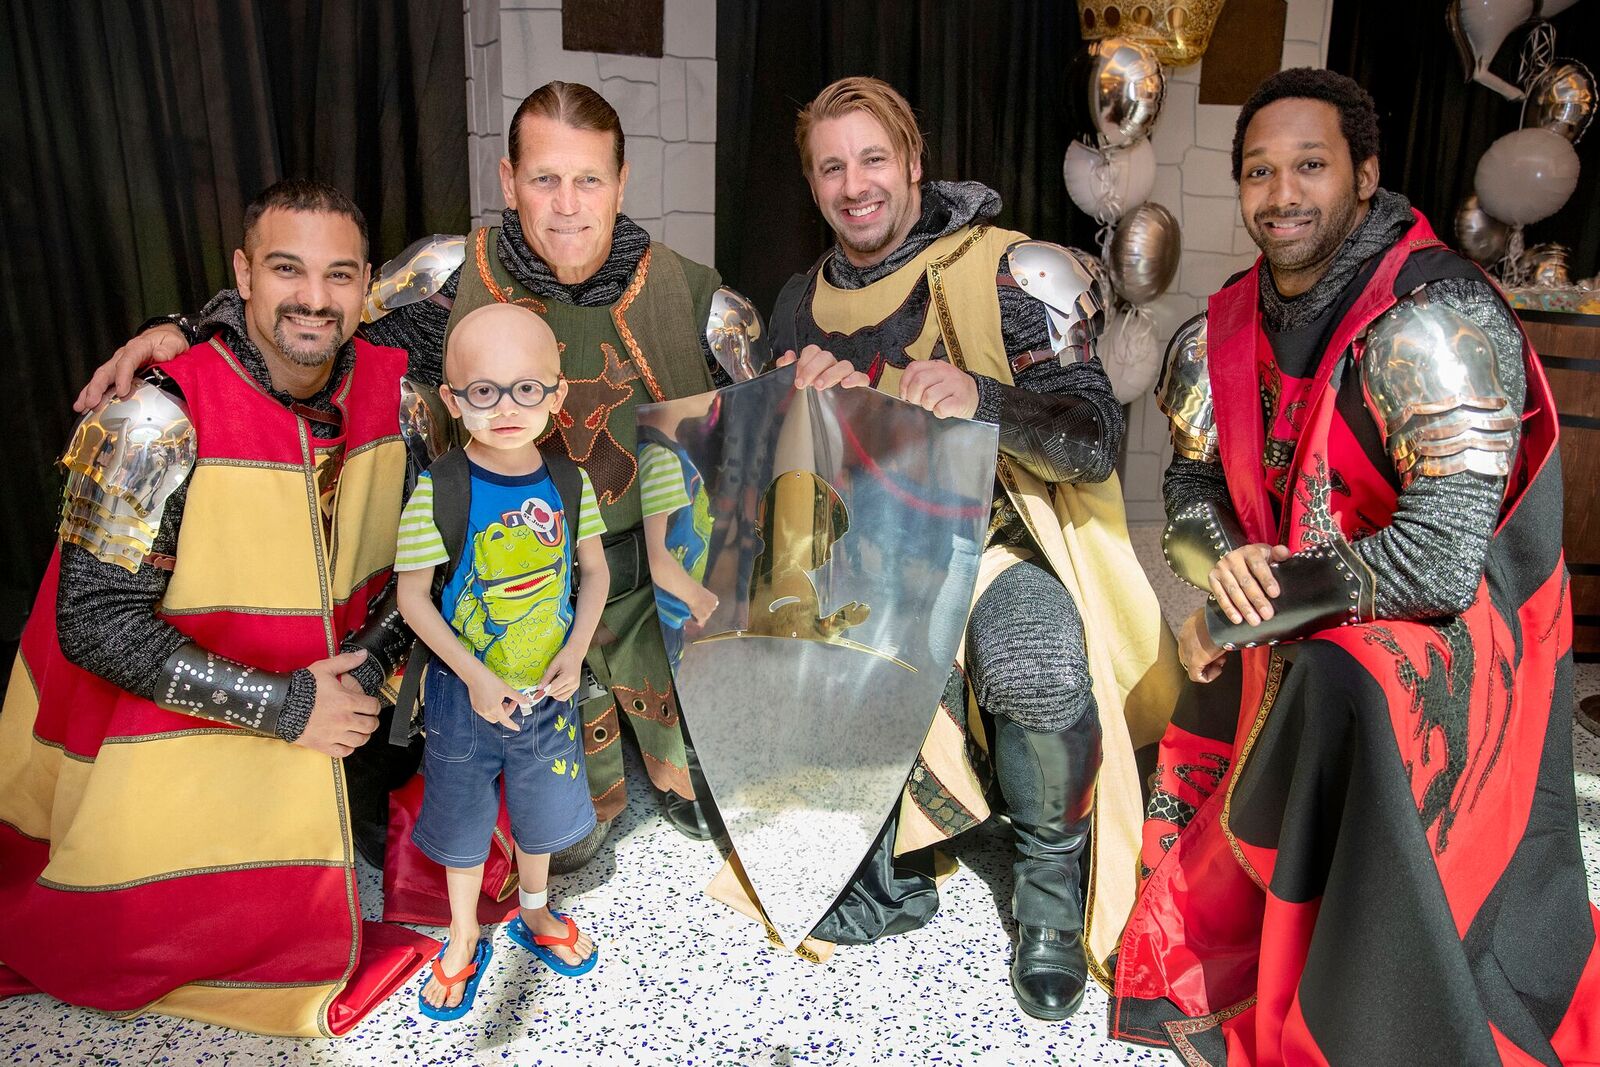 Medieval Times Host St. Jude’s Benefit Show